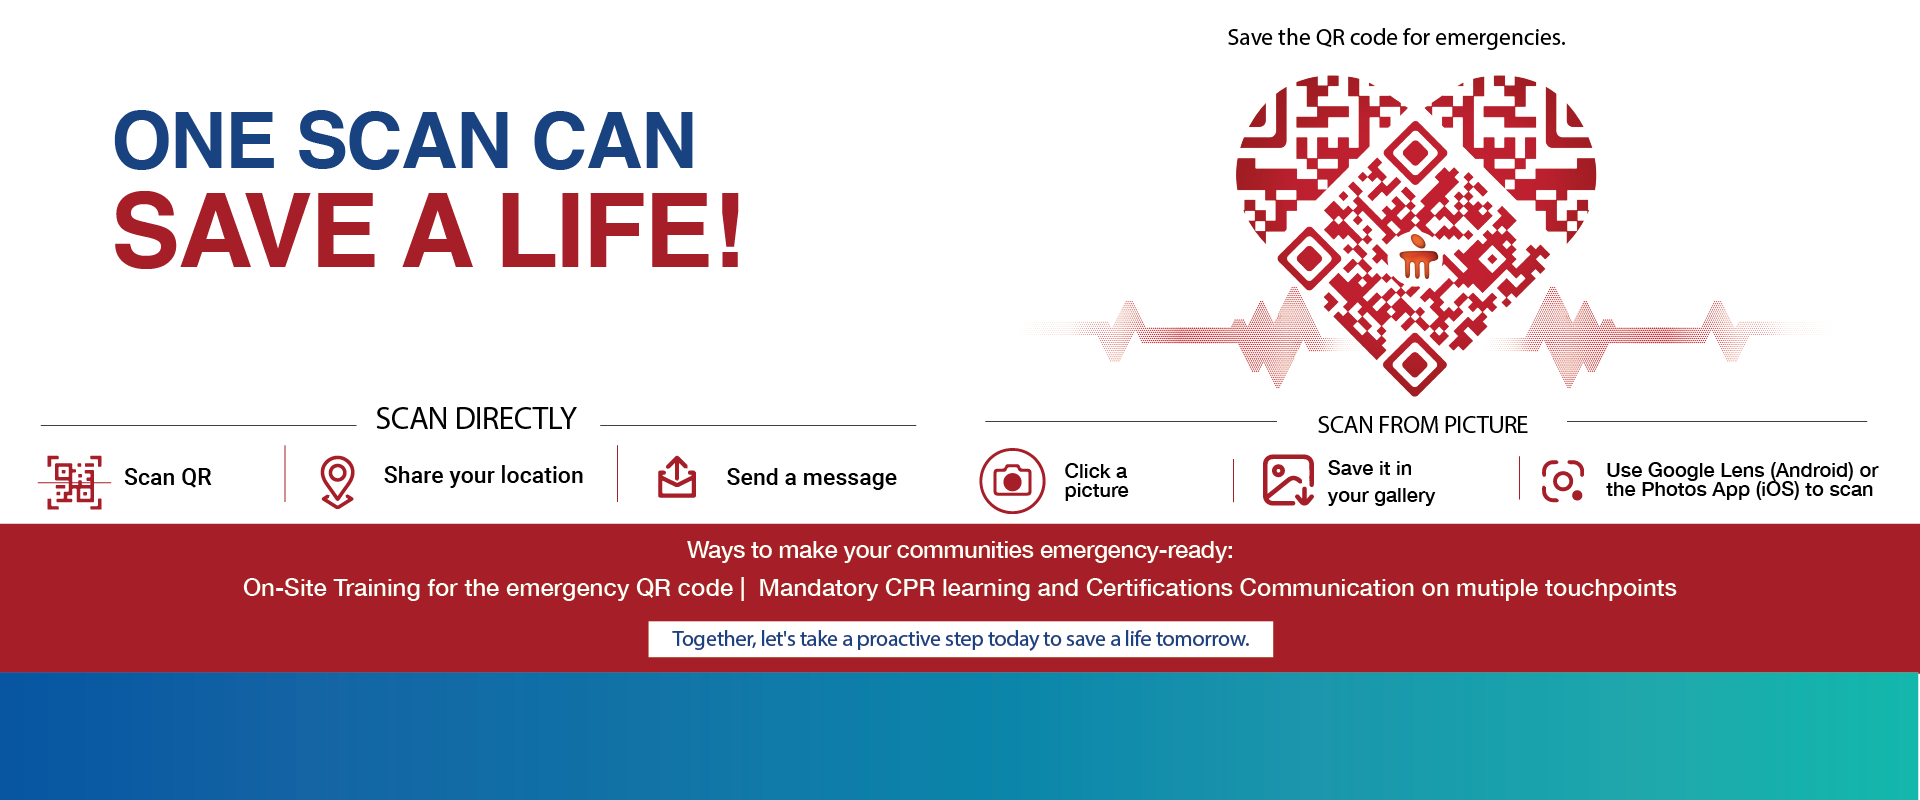 Learn CPR Now - One Scan Can Save A Life in Emergency